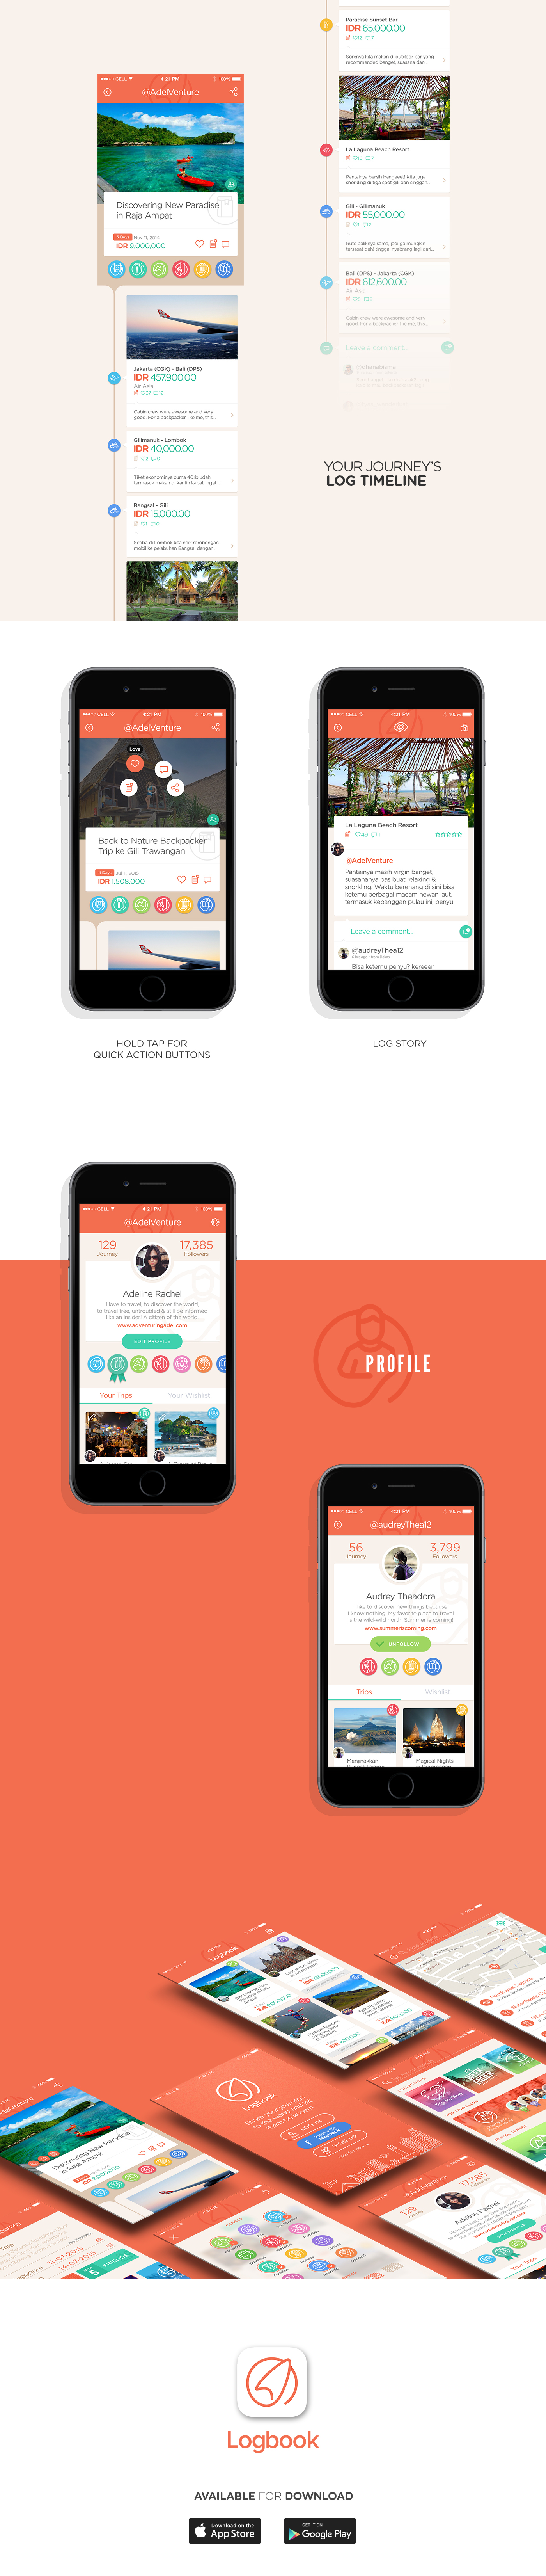 logbook Travel social app UI ux indonesia discover journey journal community Guide icons mobile